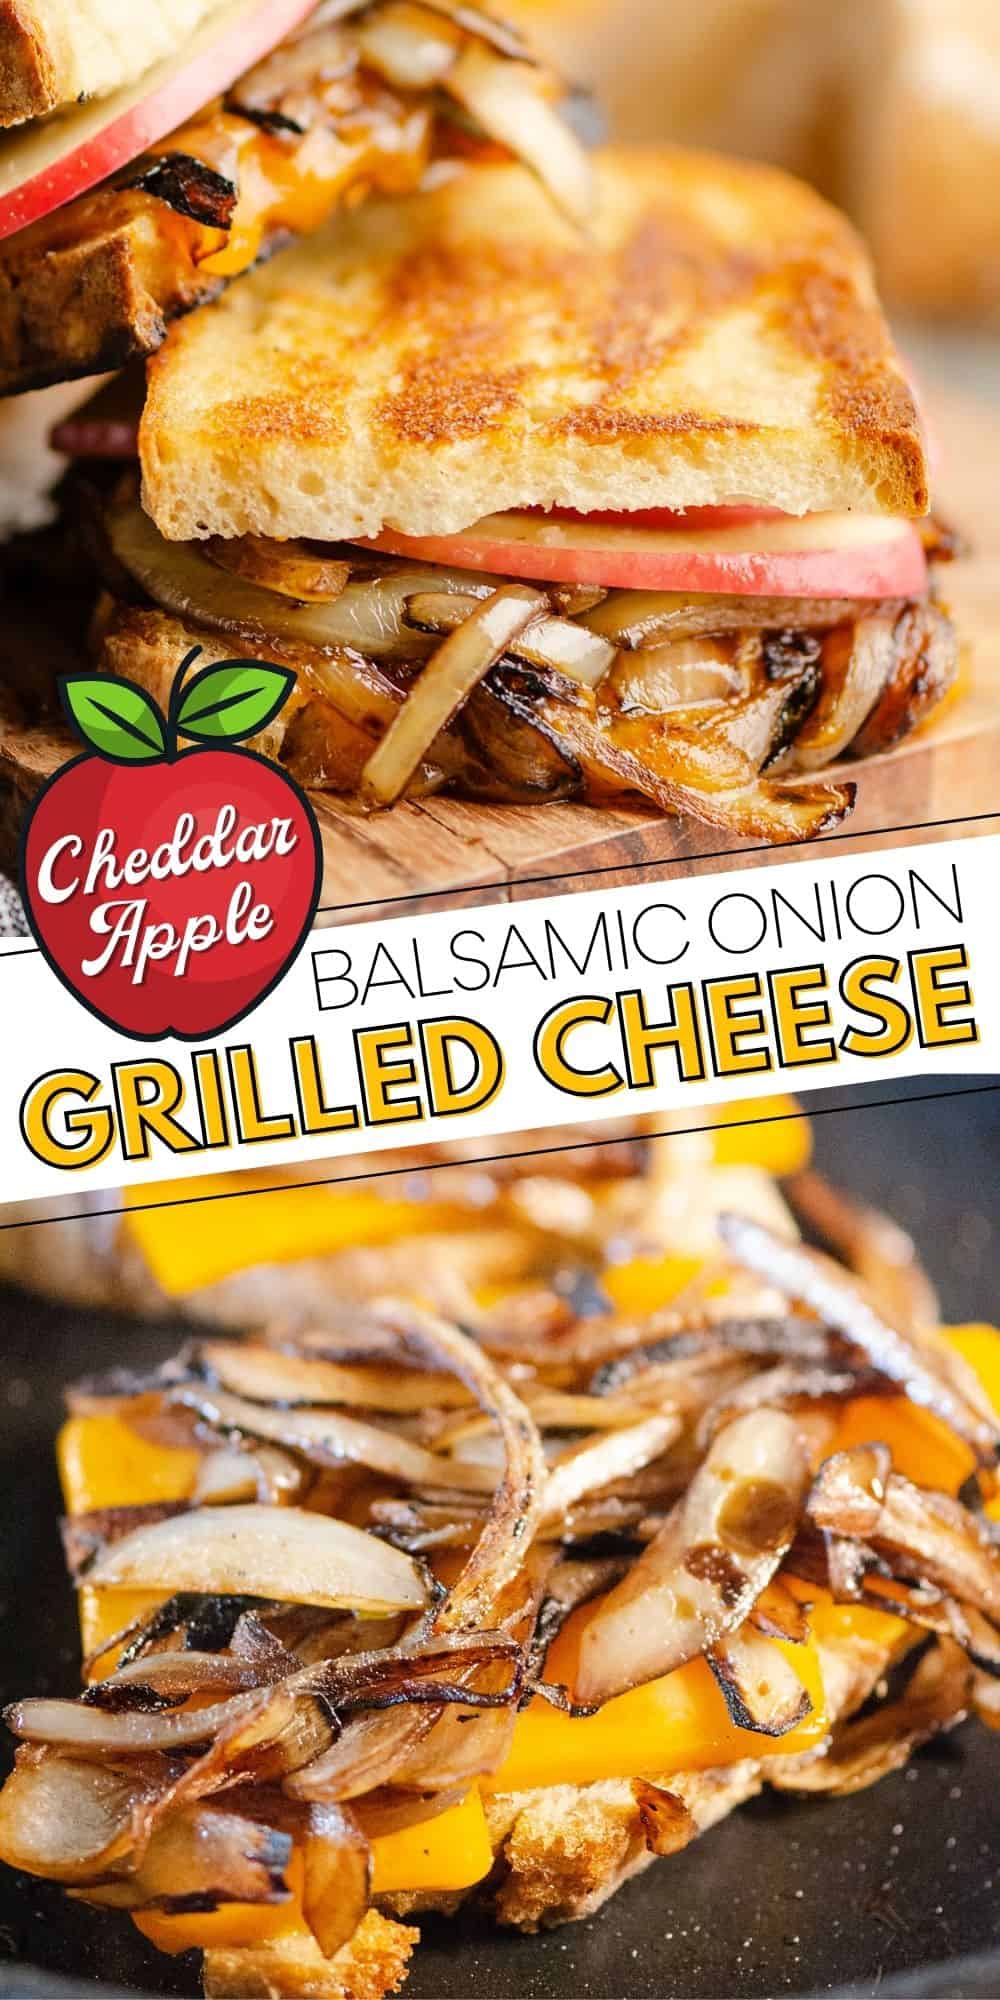 Apple Balsamic Onion Grilled Cheese